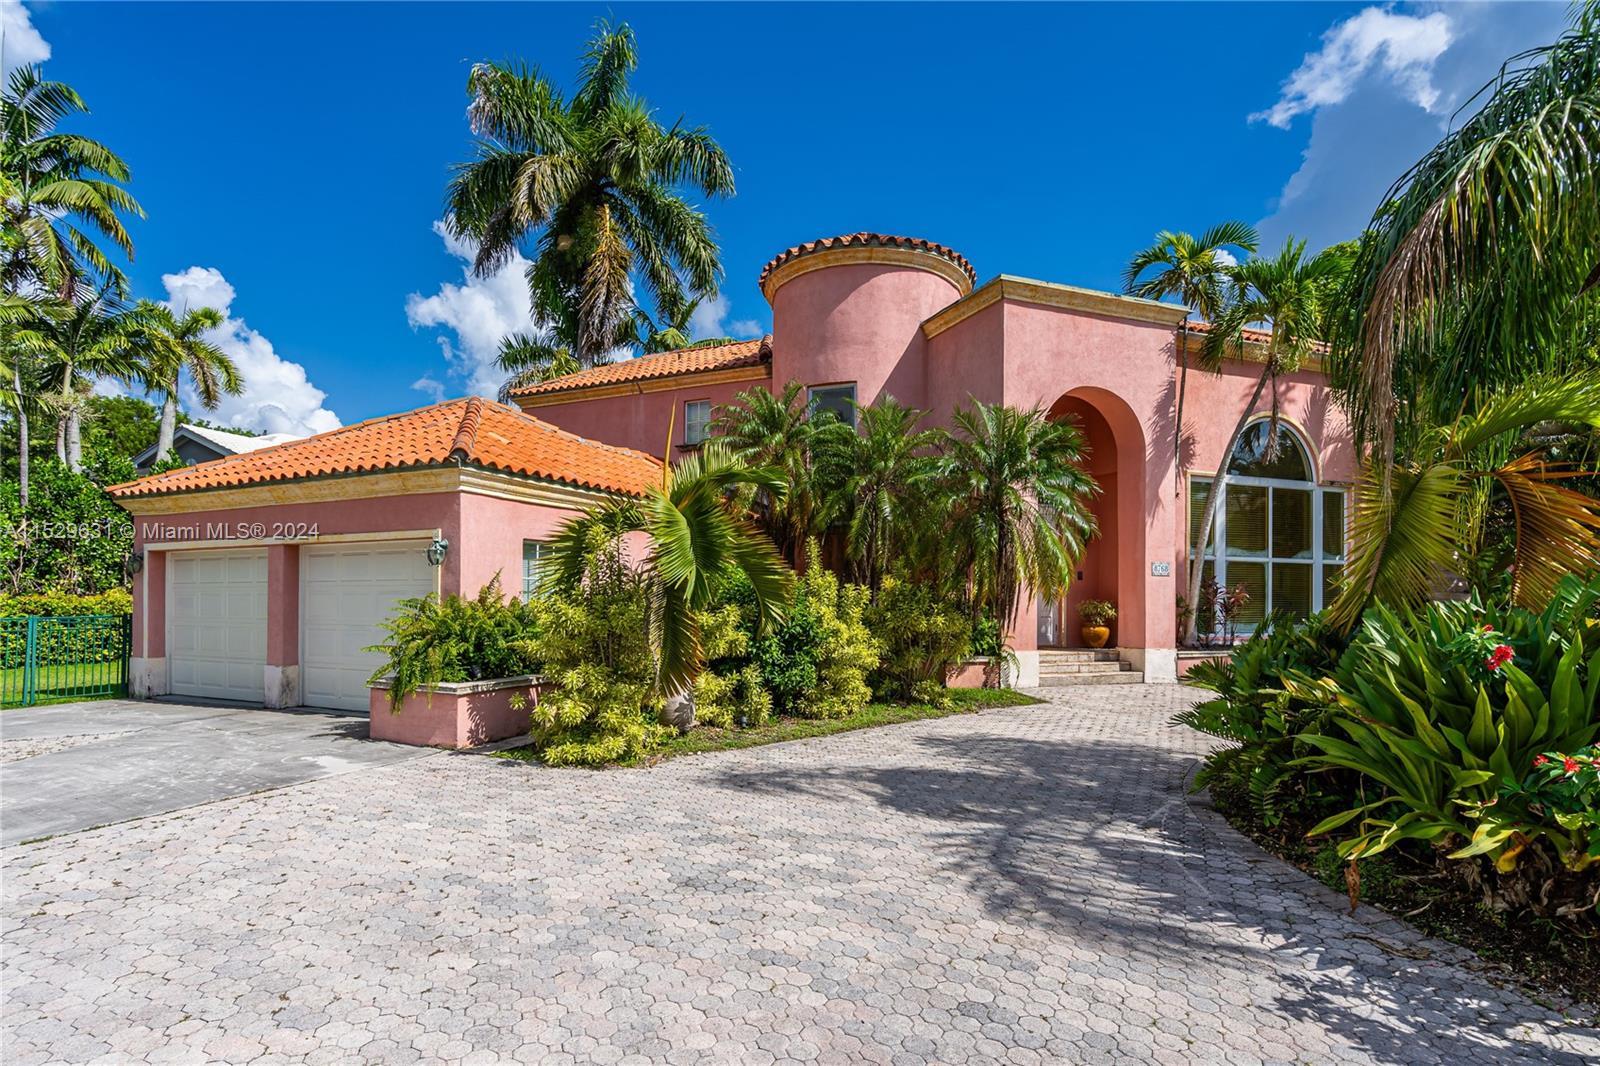 Embark on a journey through the transformation of a Mediterranean marvel in Pinecrest, FL. This 1991